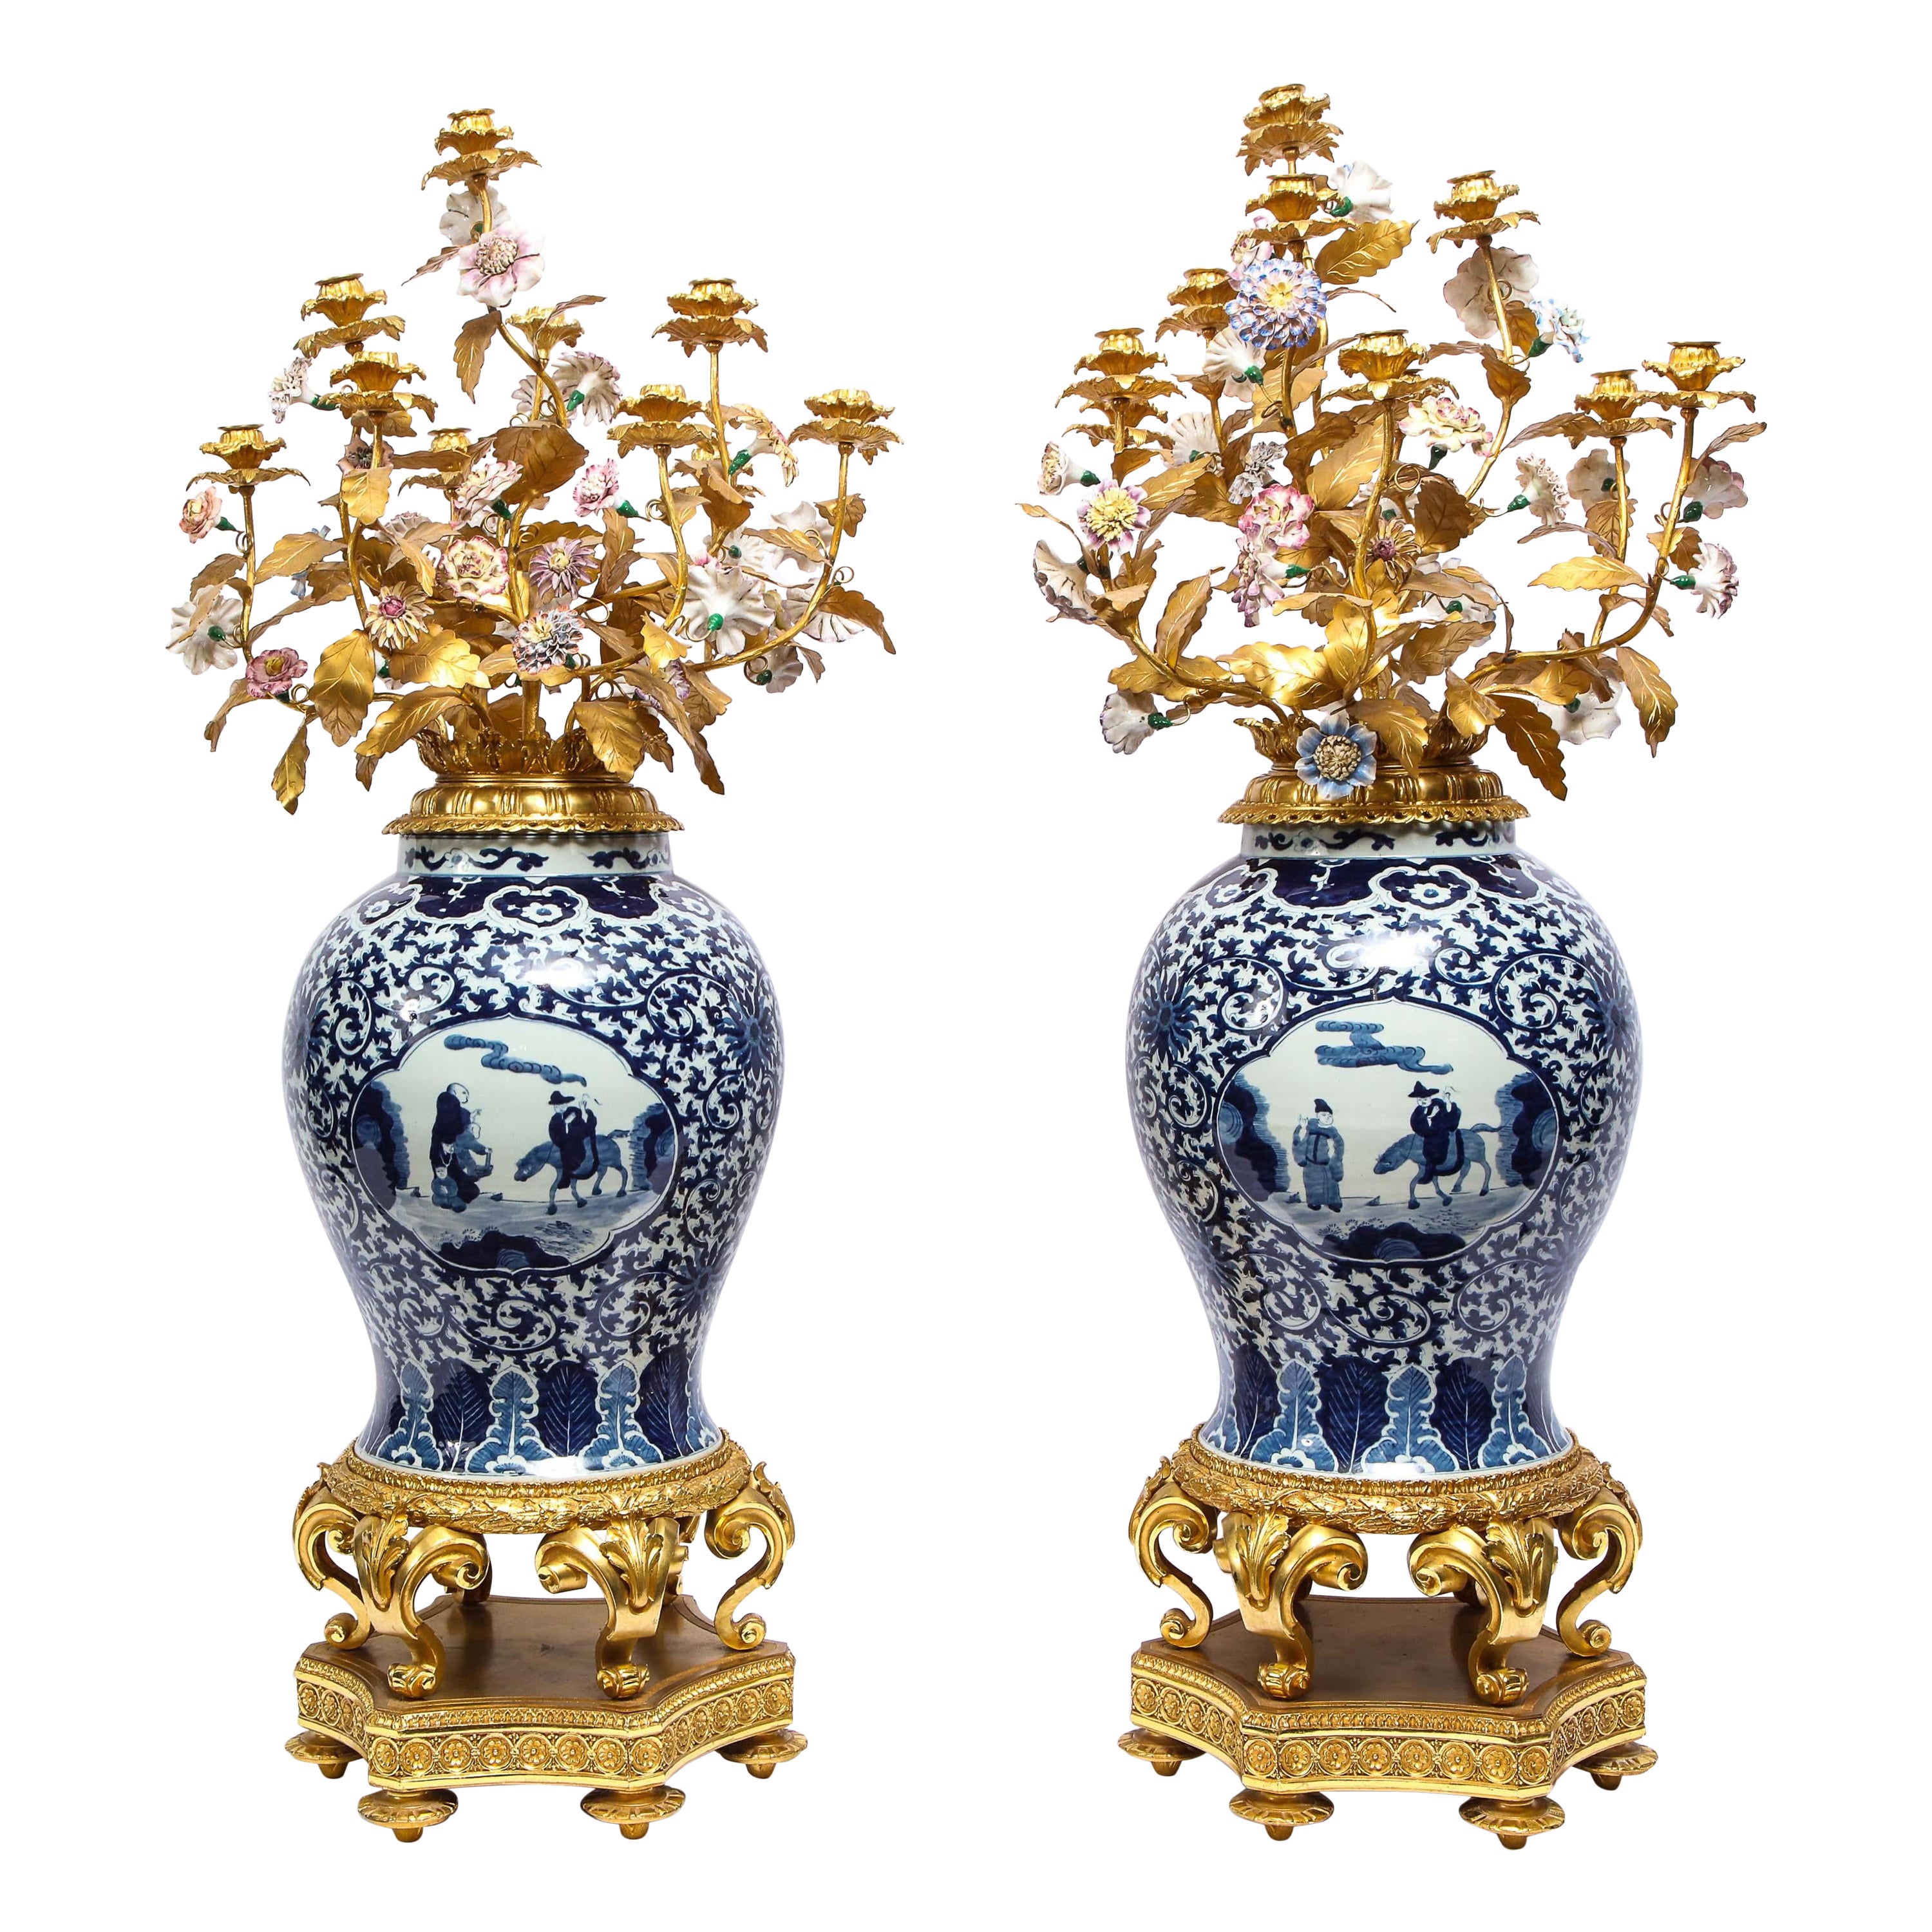 Pair of French Ormolu Mounted Chinese Blue & White Porcelain Ten Arm Candelabras For Sale